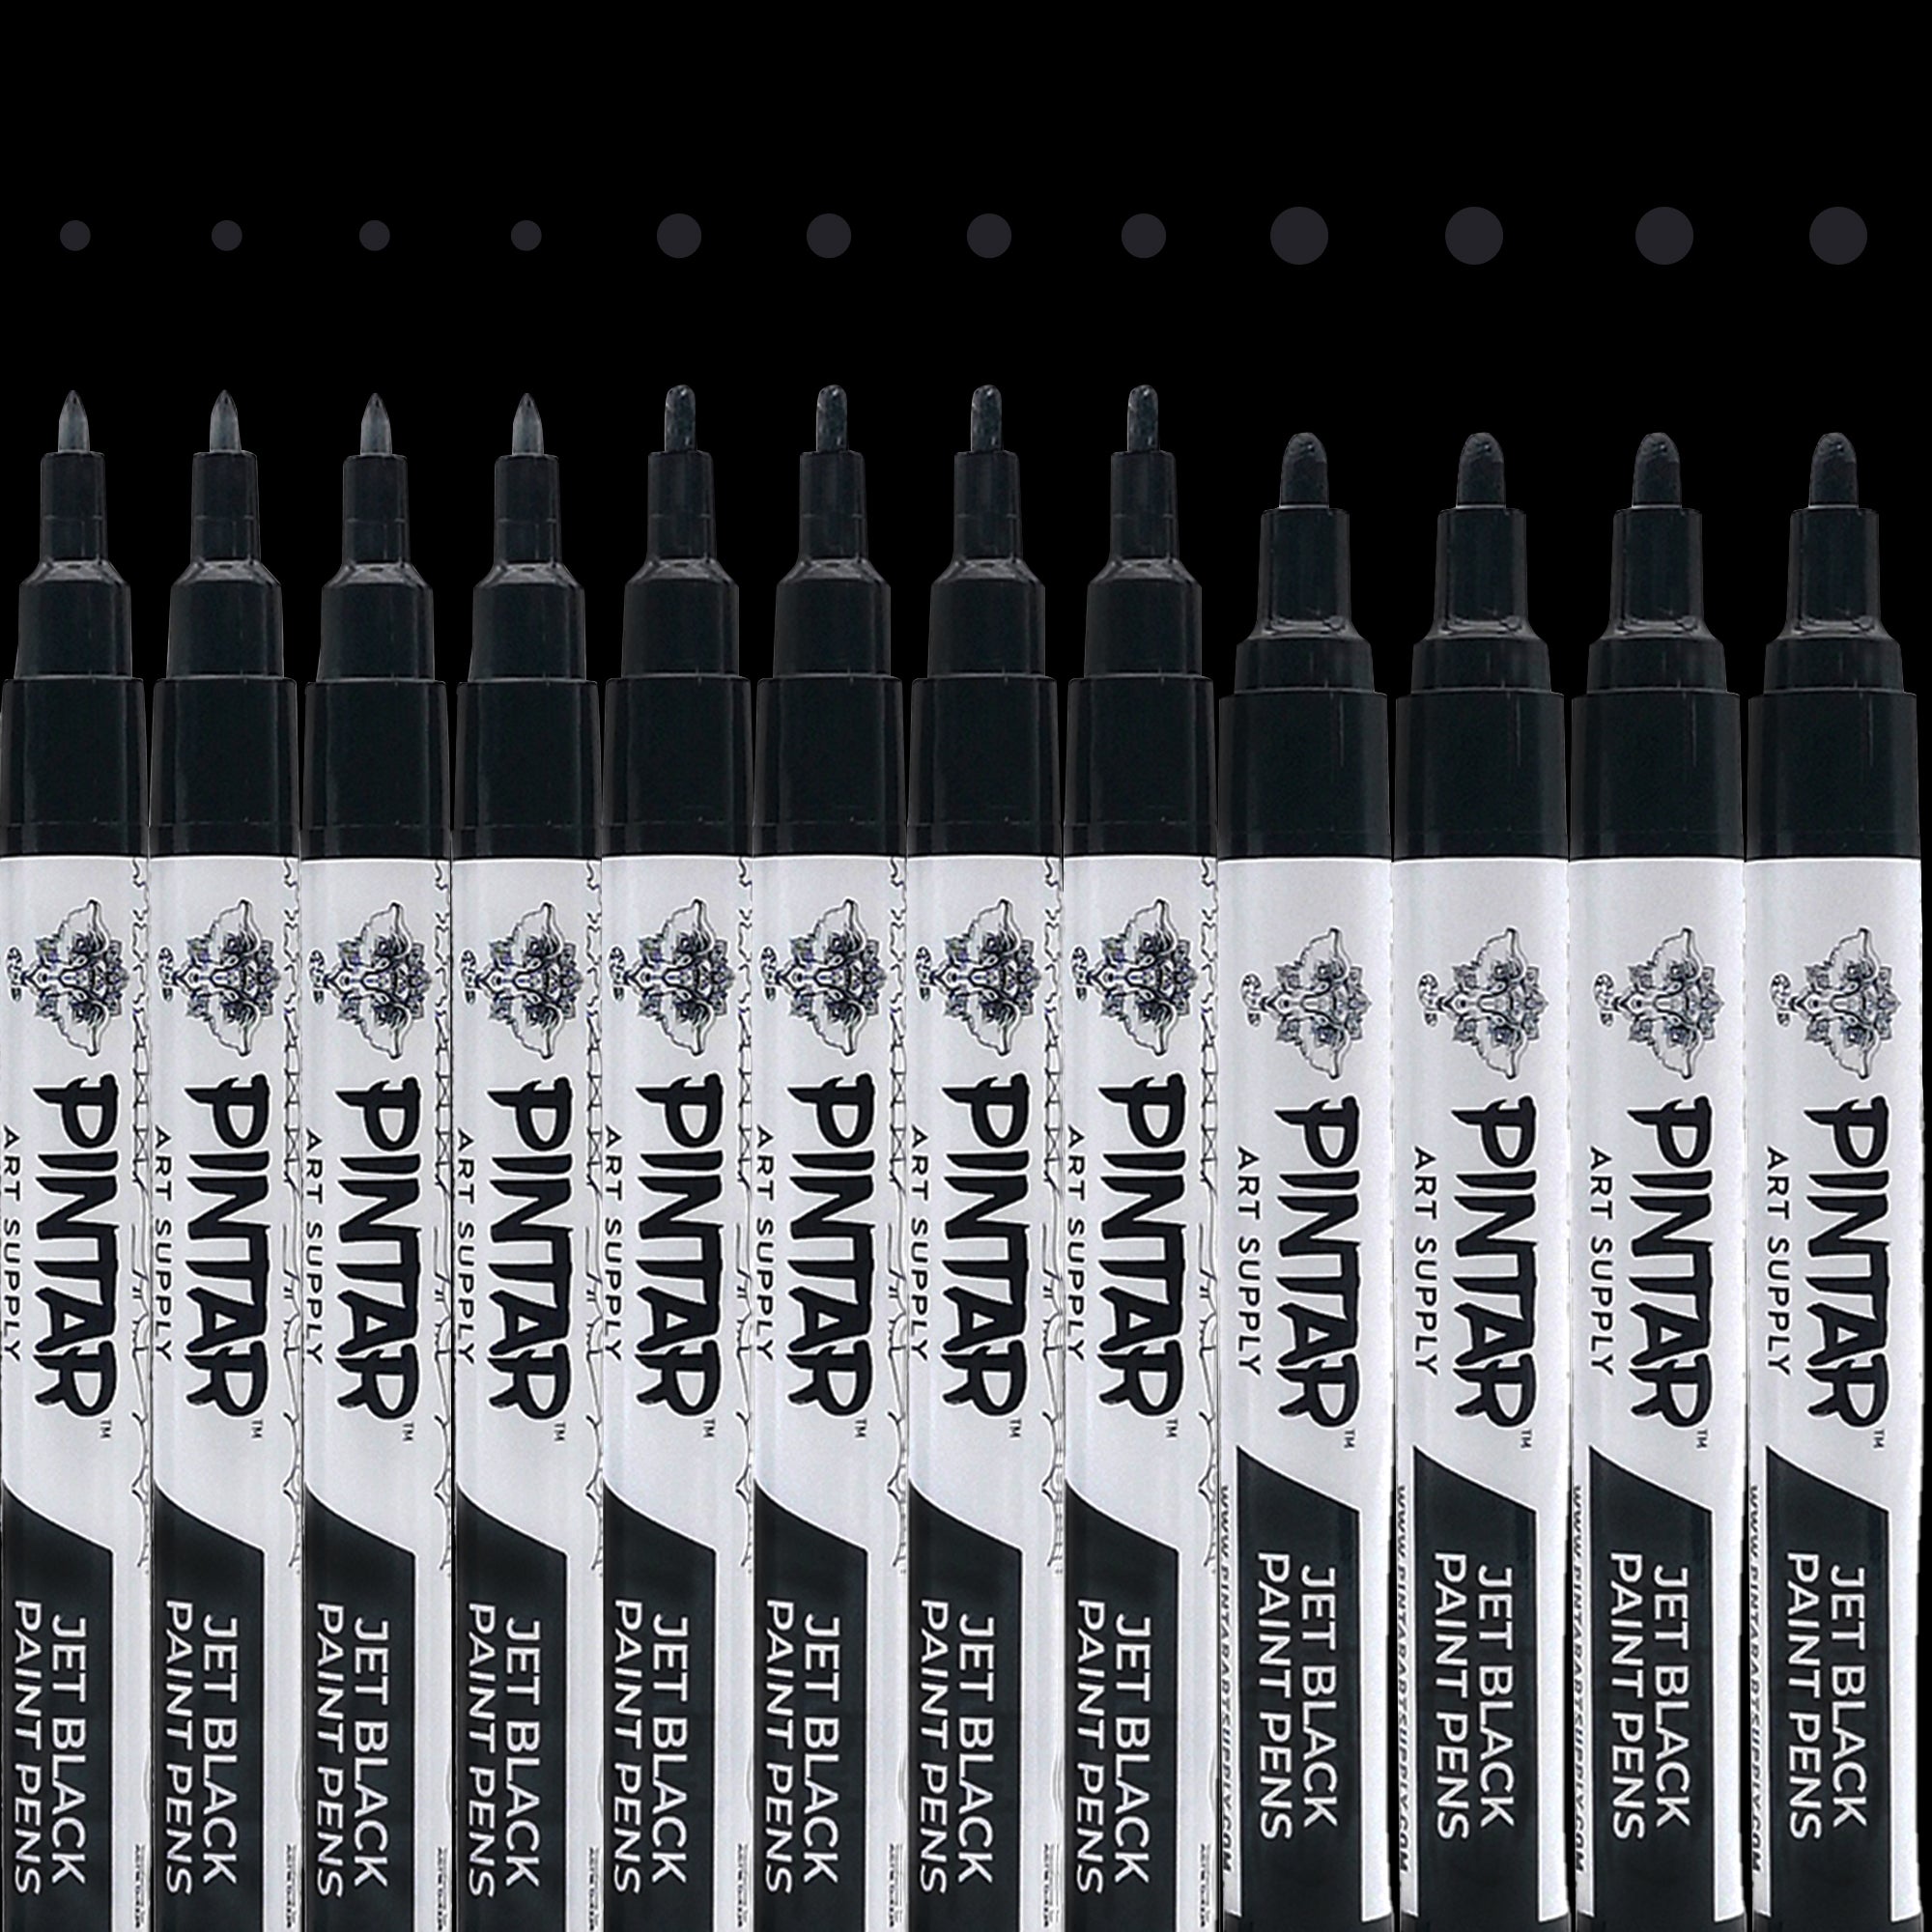 Permanent Paint Marker Pens, Black and White